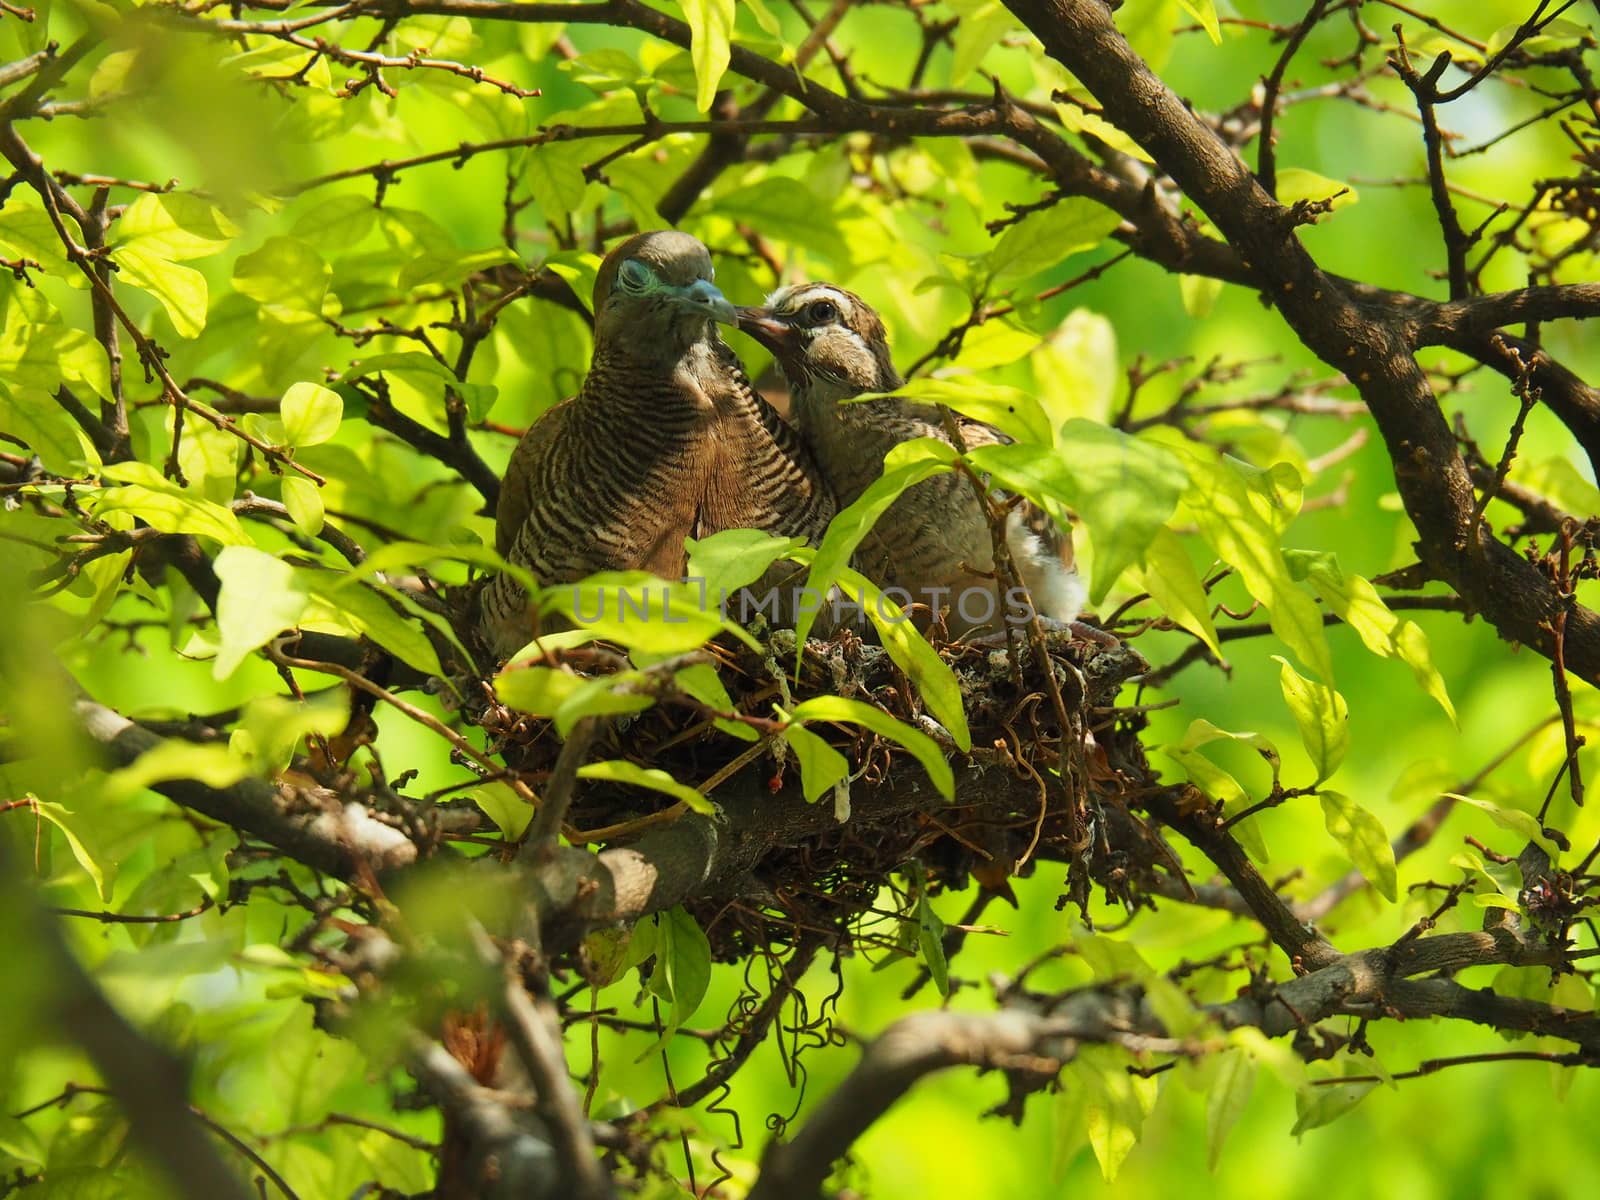 Two Birds, Baby Bird Kiss Mother With Love In Bird's Nest On Trees